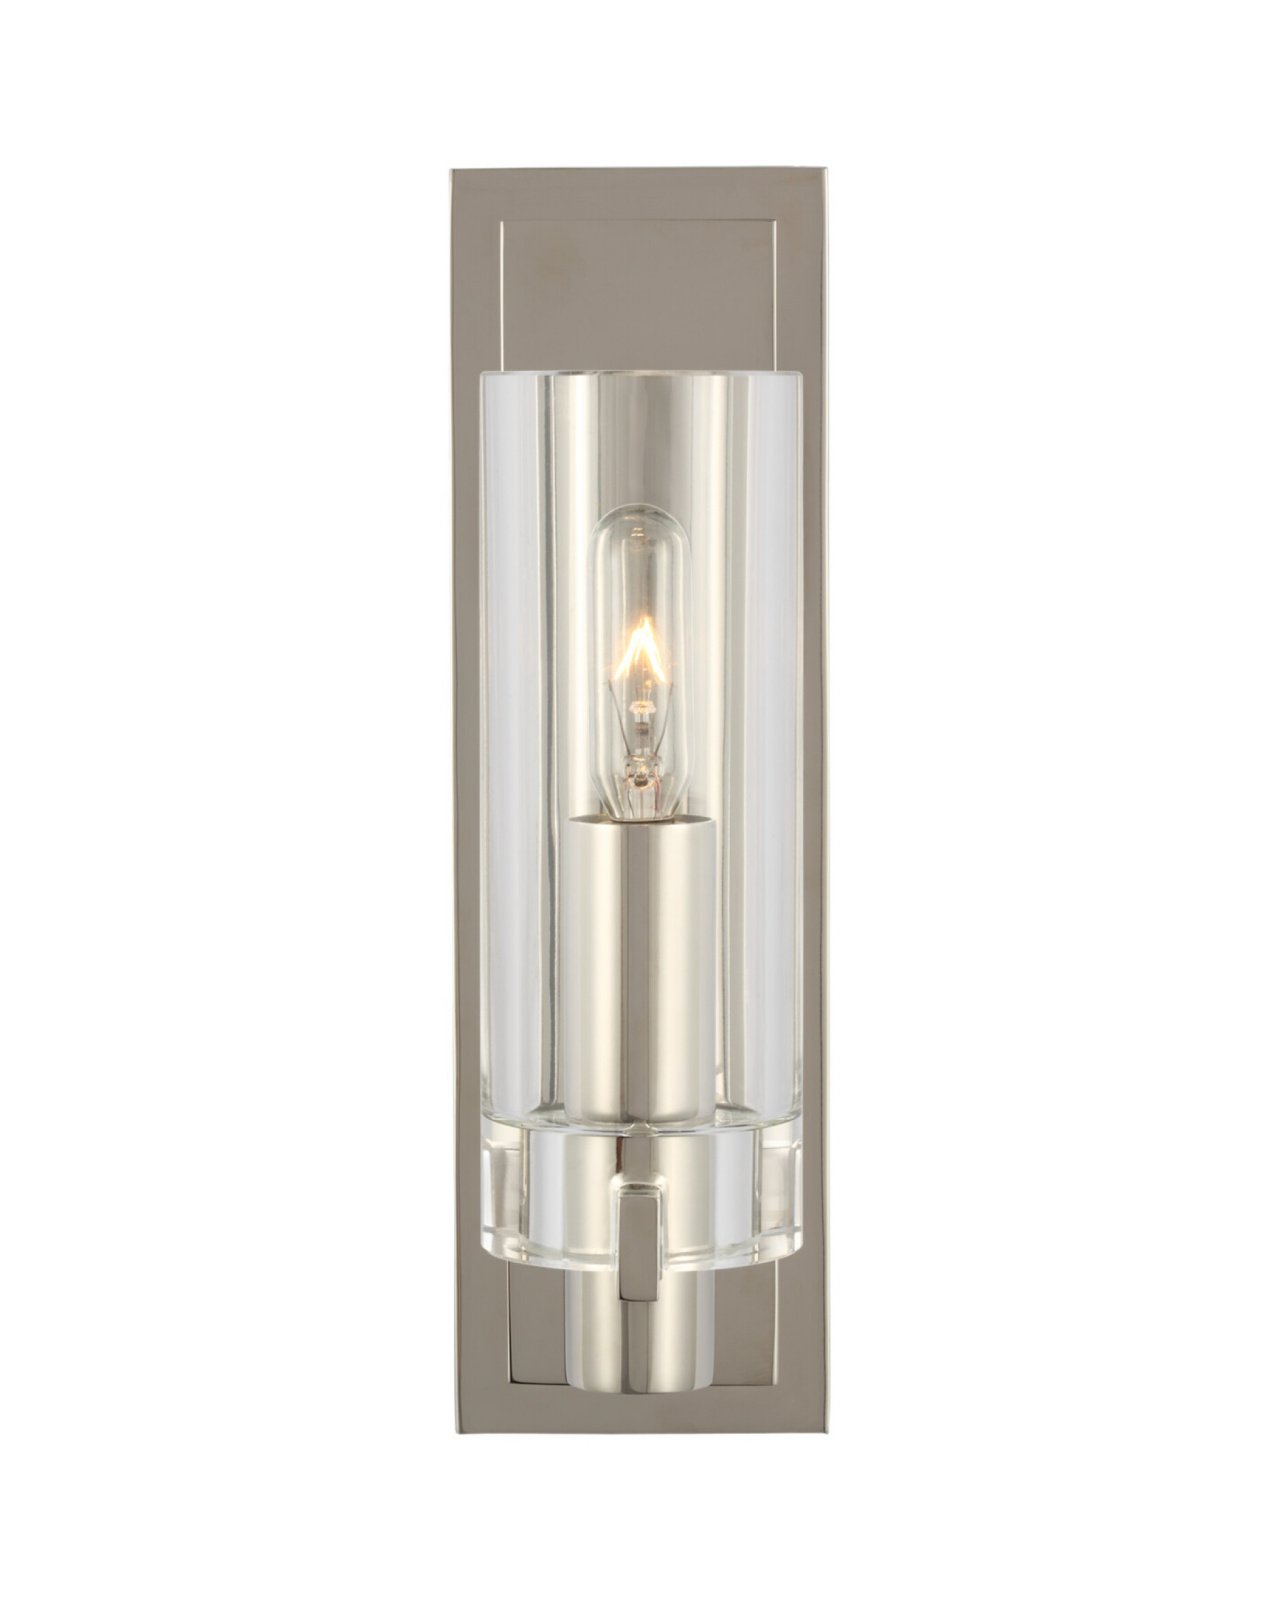 Sonnet Petite Single Sconce Polished Nickel/Clear